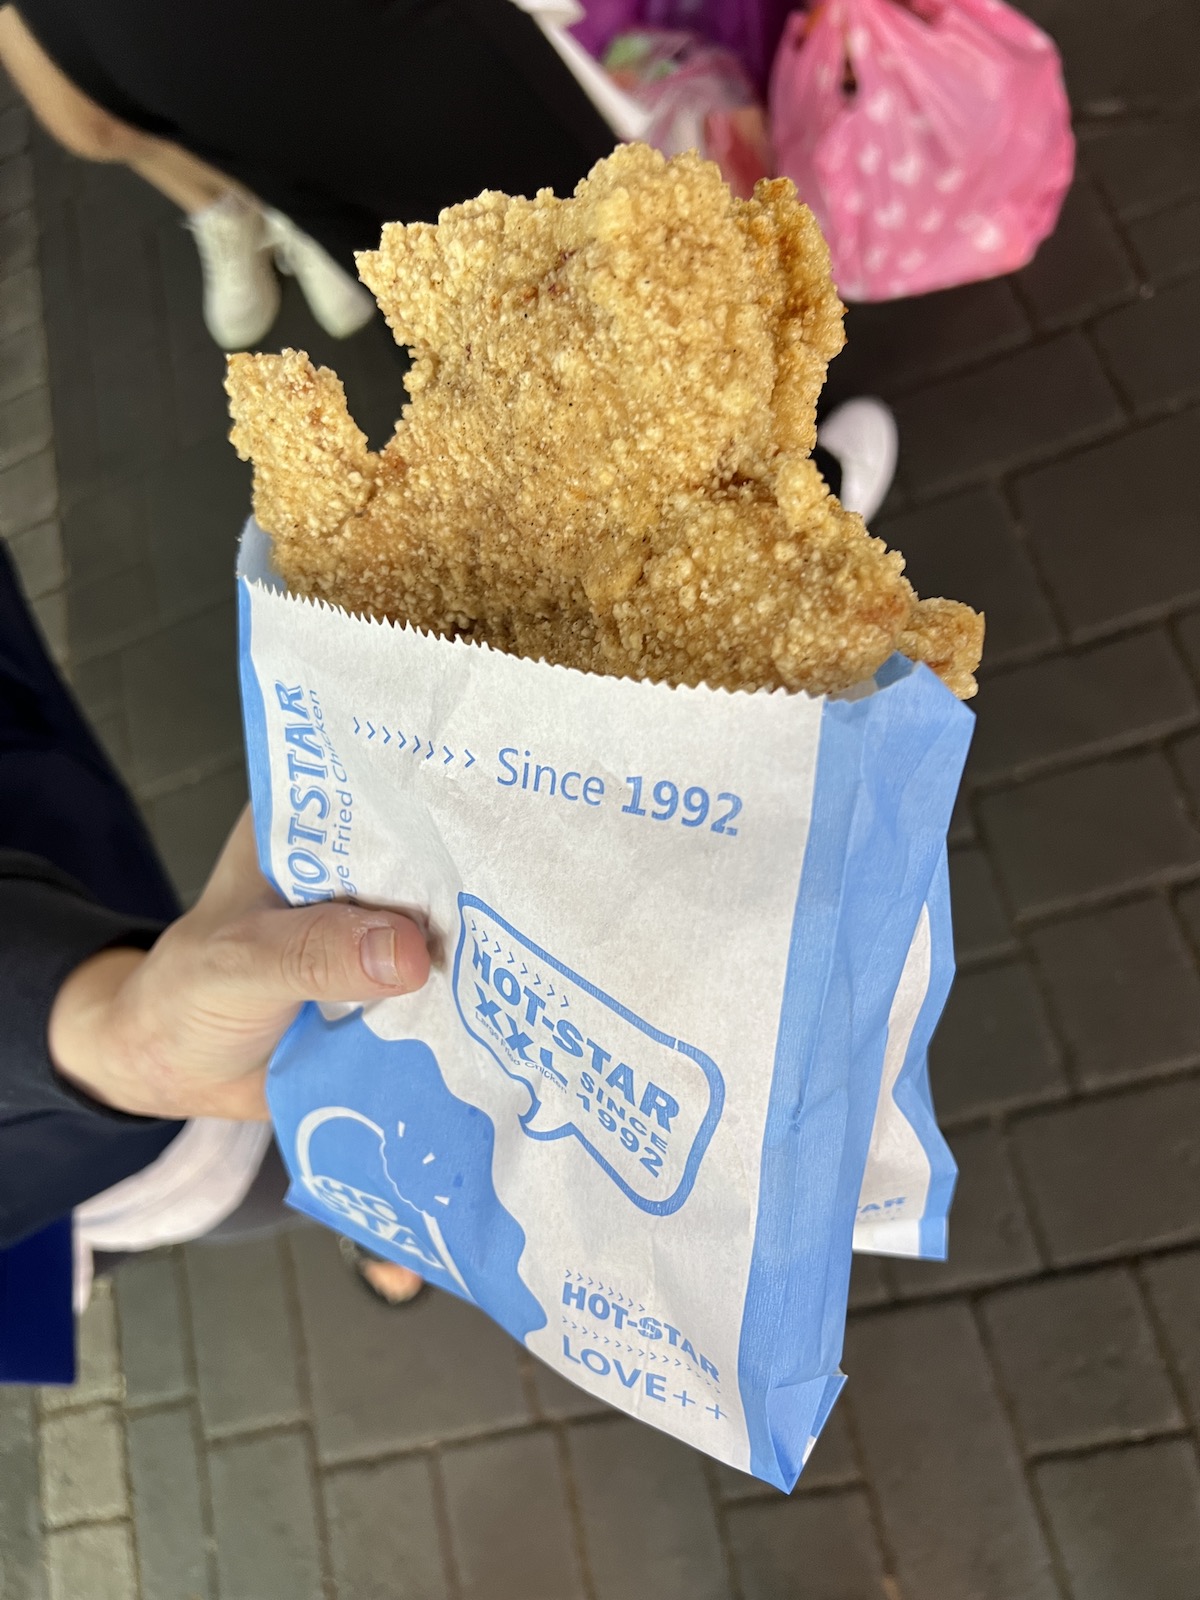 Hot Star is super famous Taiwanese fried chicken cutlets. Shilin Market is where it originated.